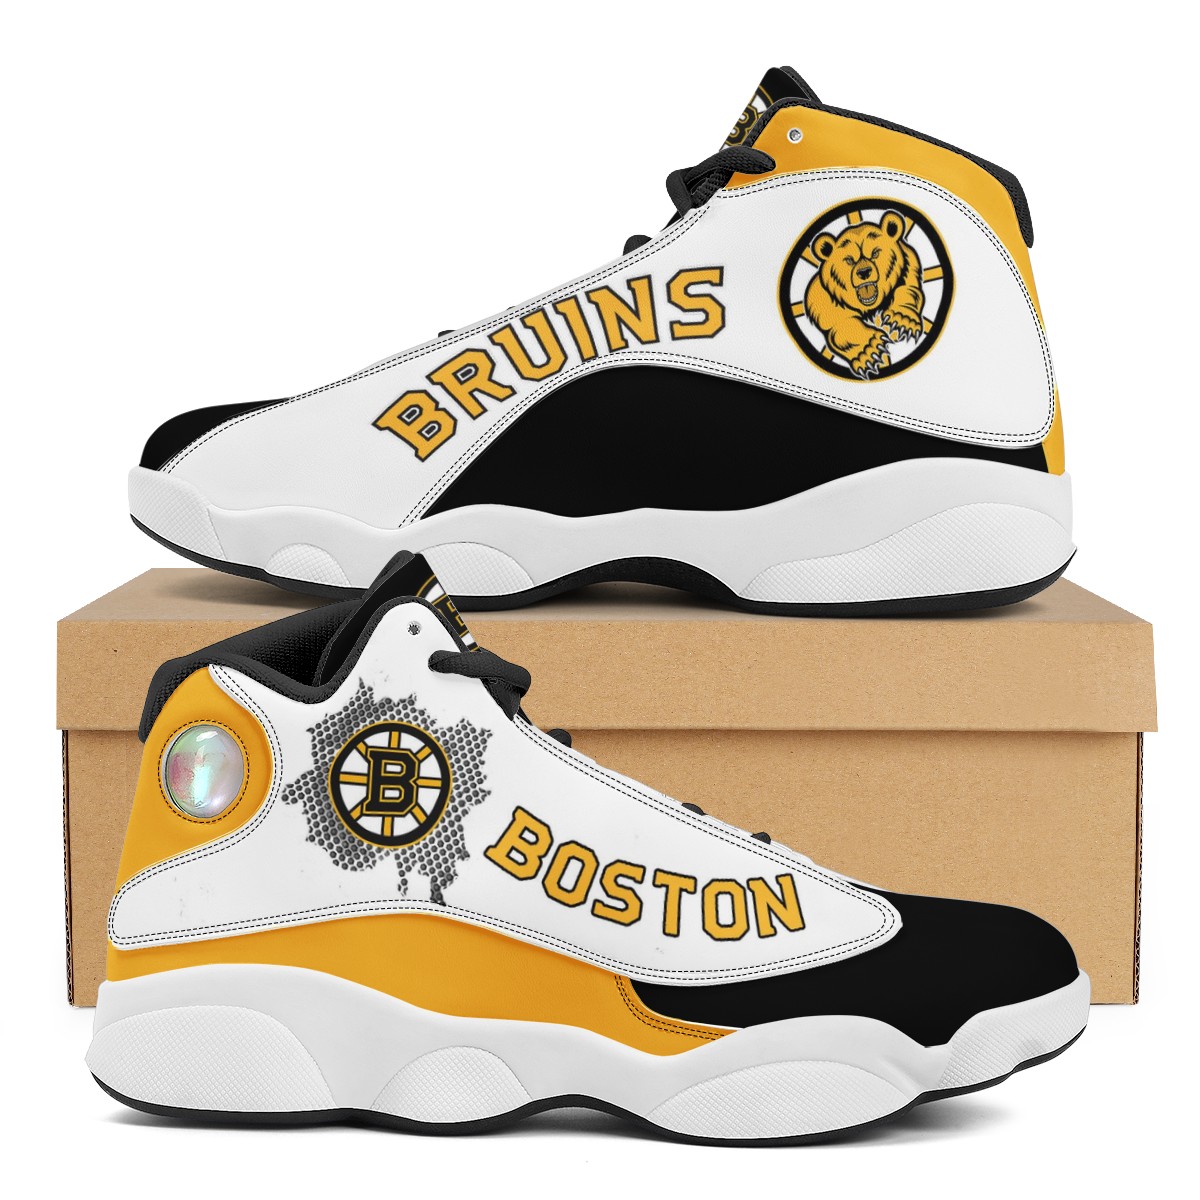 Women's Boston Bruins Limited Edition JD13 Sneakers 001